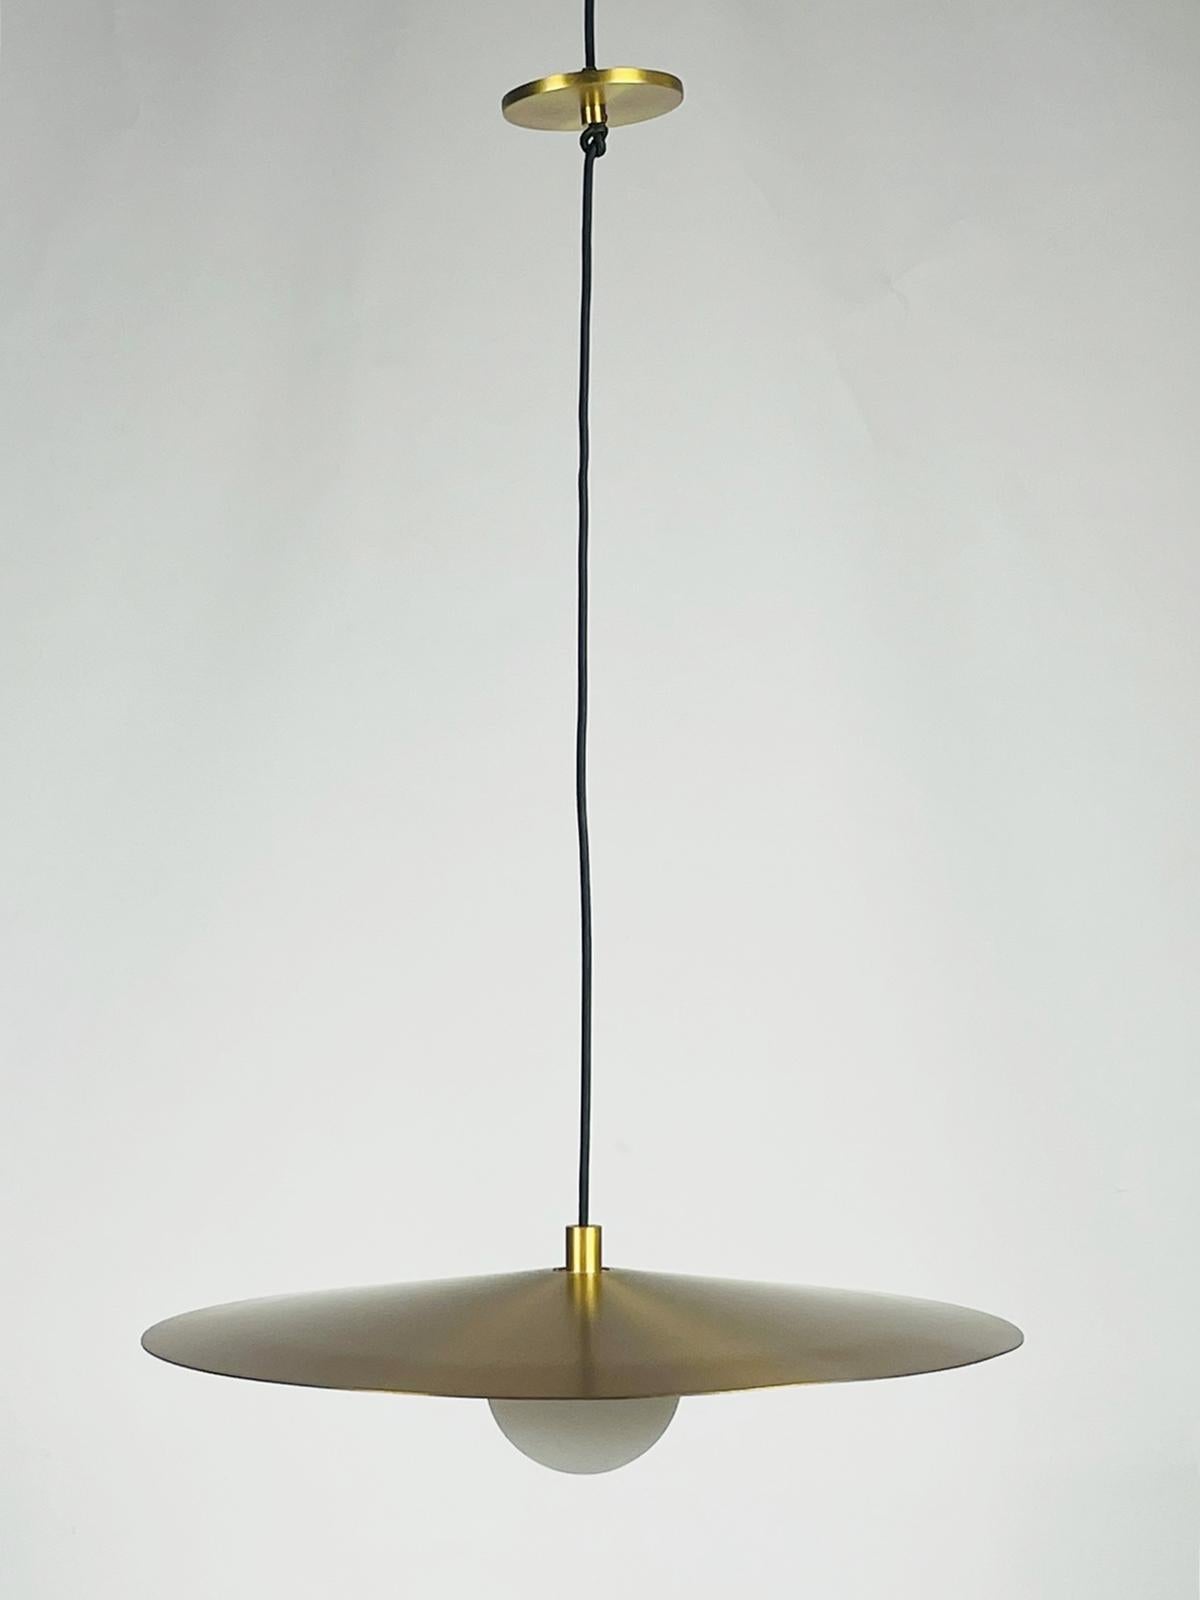 The Pirlo pendant by Sean Lavin for Tech lighting contrasts a flattened metal shade with a frosted glass globe, creating the quintessential Mid-Century modern look. The metal shade directs light downward for illuminating surfaces. The shade is